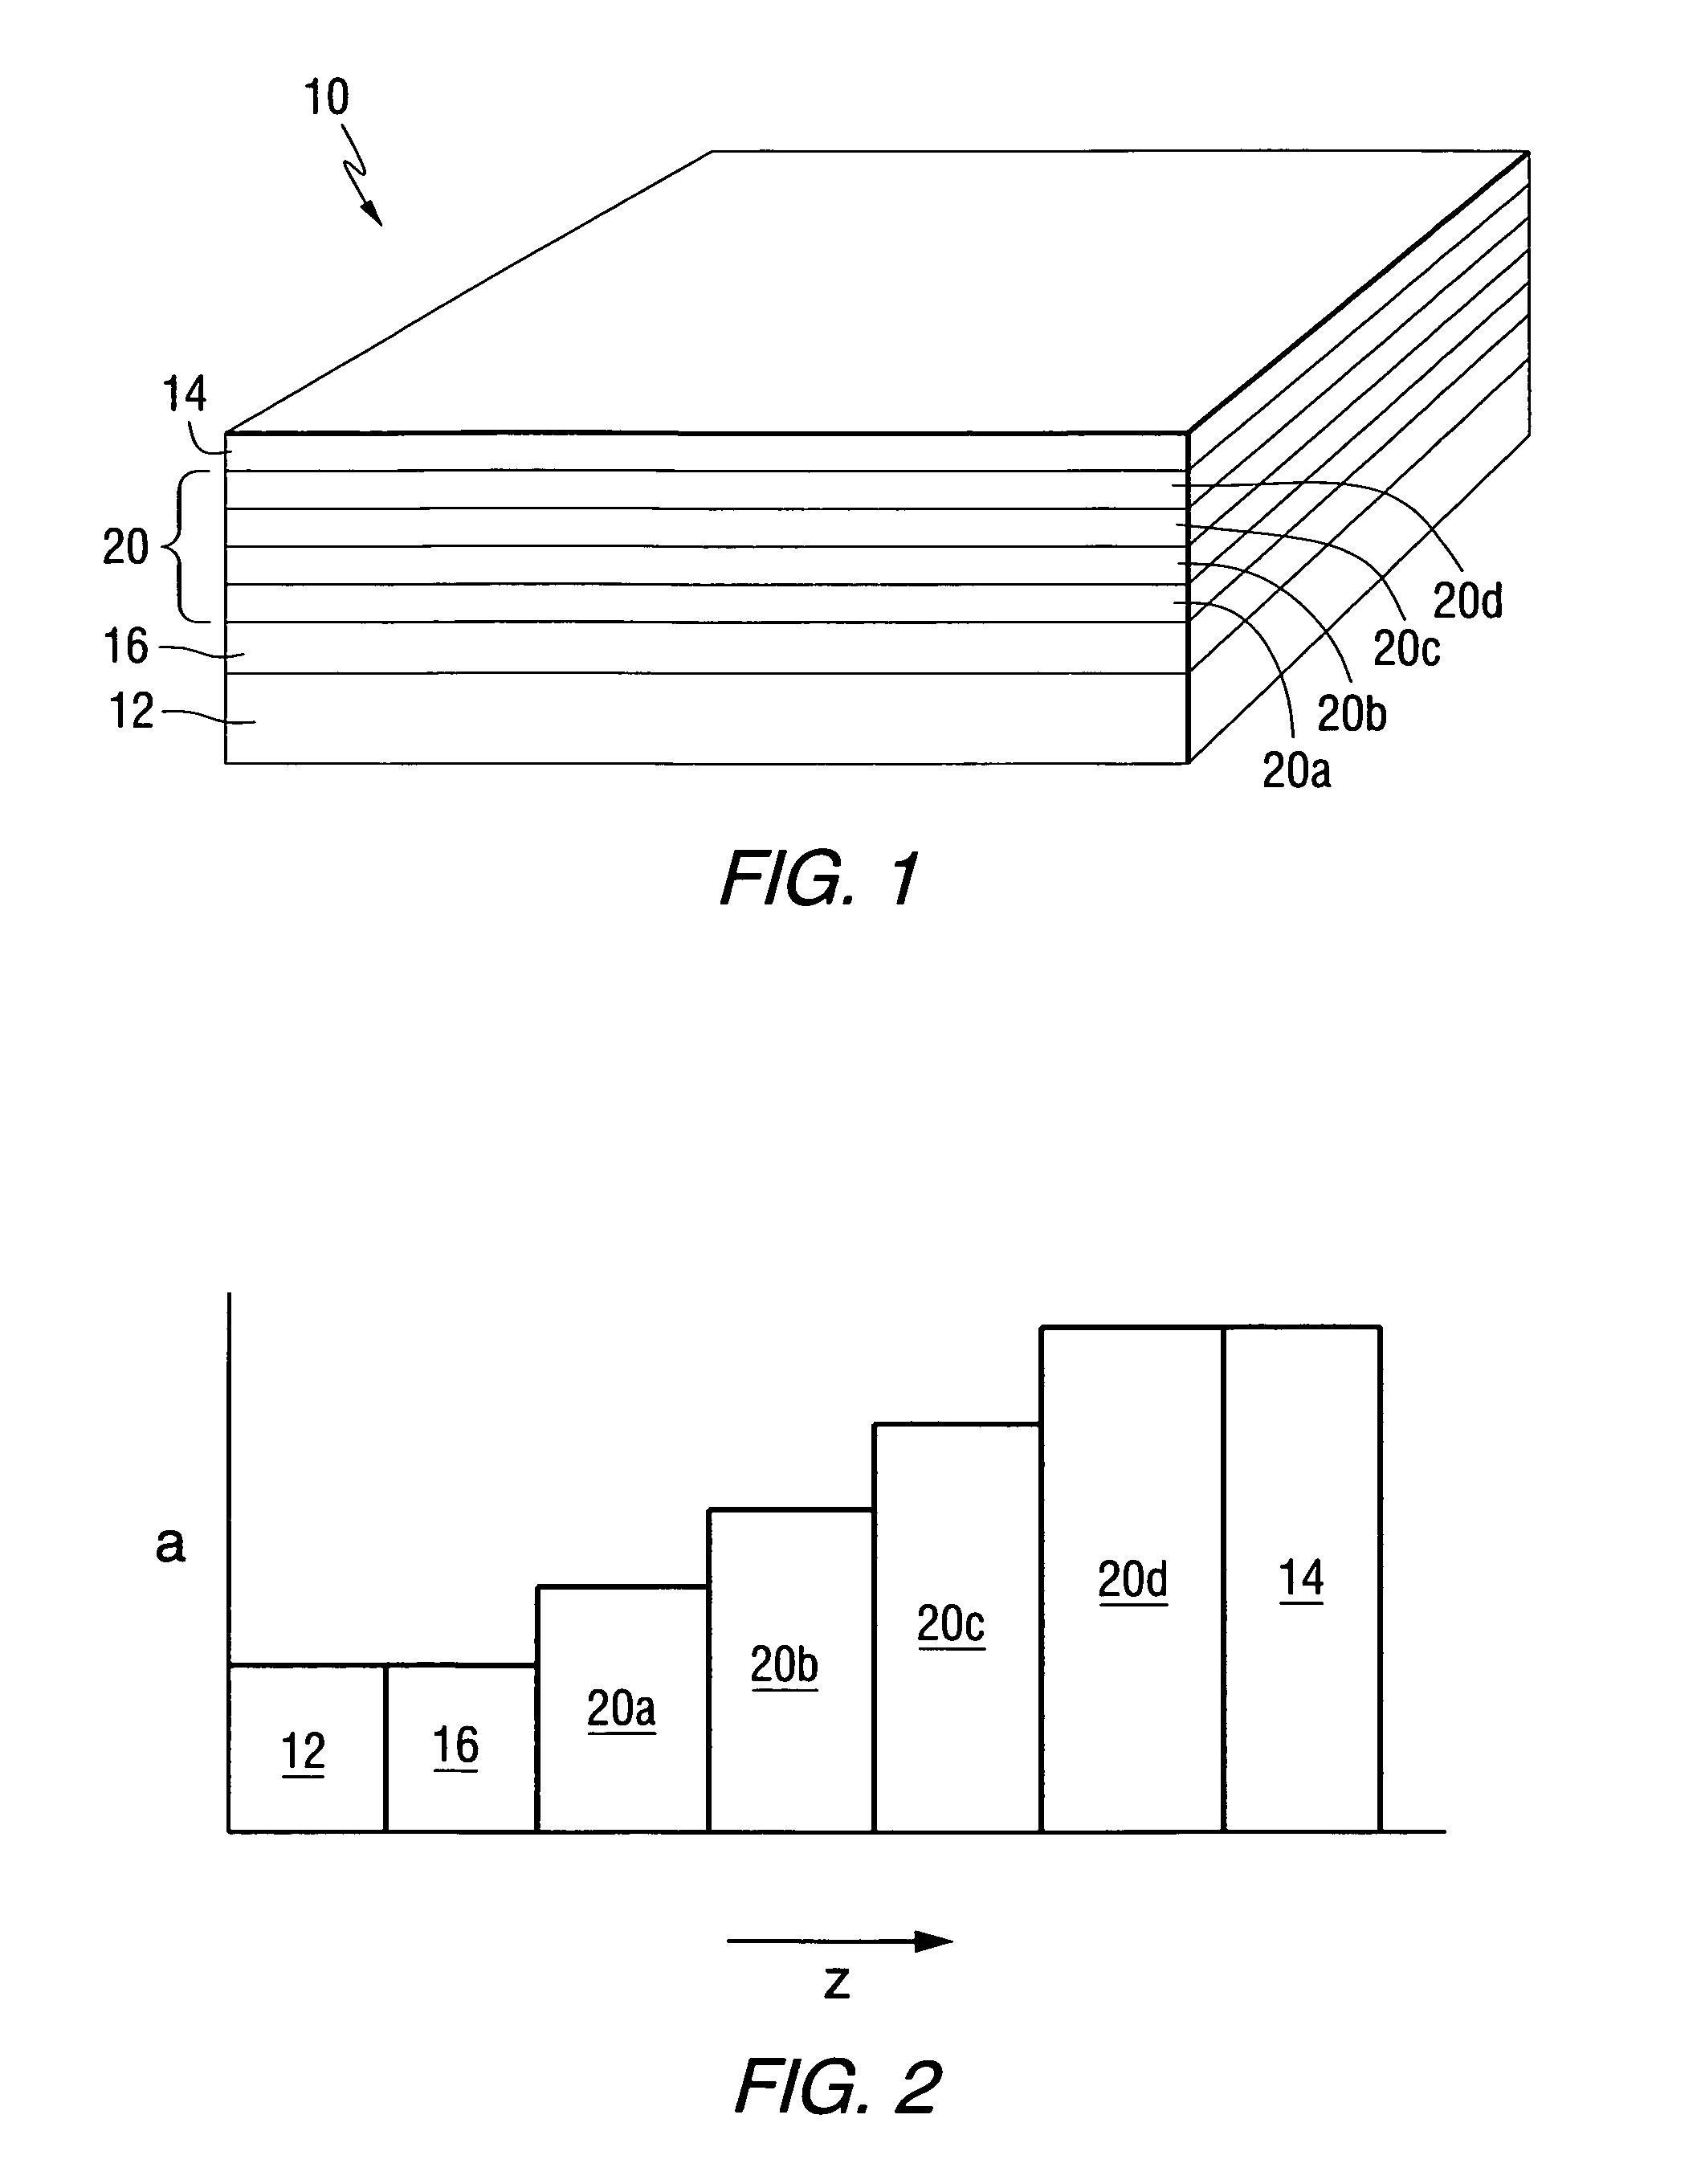 Epitaxial ferroelectric and magnetic recording structures including graded lattice matching layers